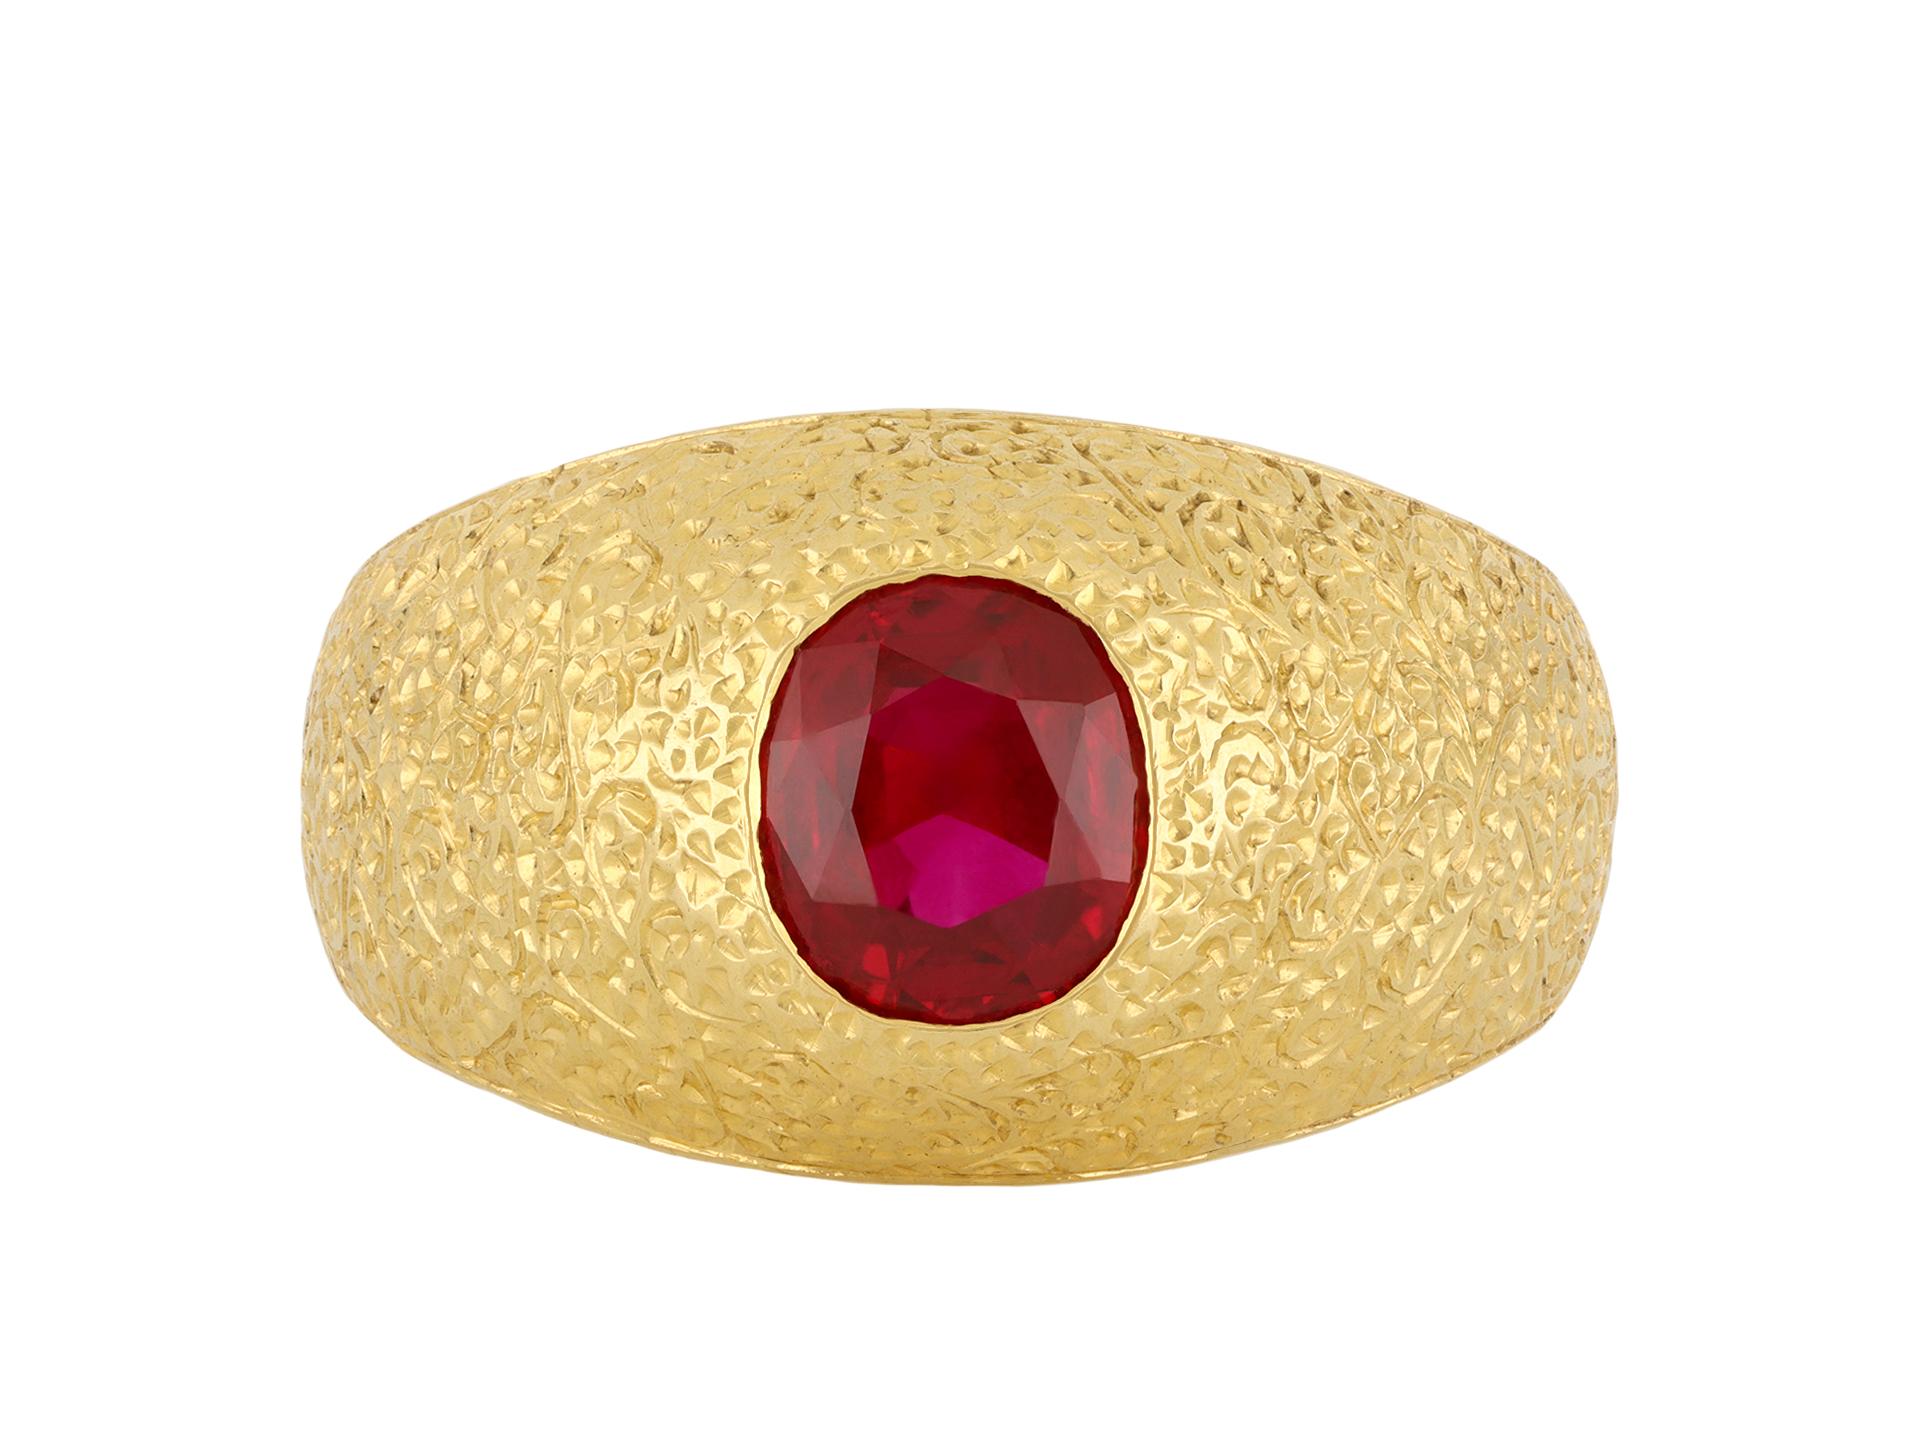 Buccellati Burmese ruby ring. Set with an oval mixed cut natural unenhanced Burmese ruby in an open back rubover setting with an approximate weight of 1.20 carats, to an impressive solitaire design featuring engraved detail throughout in a textured